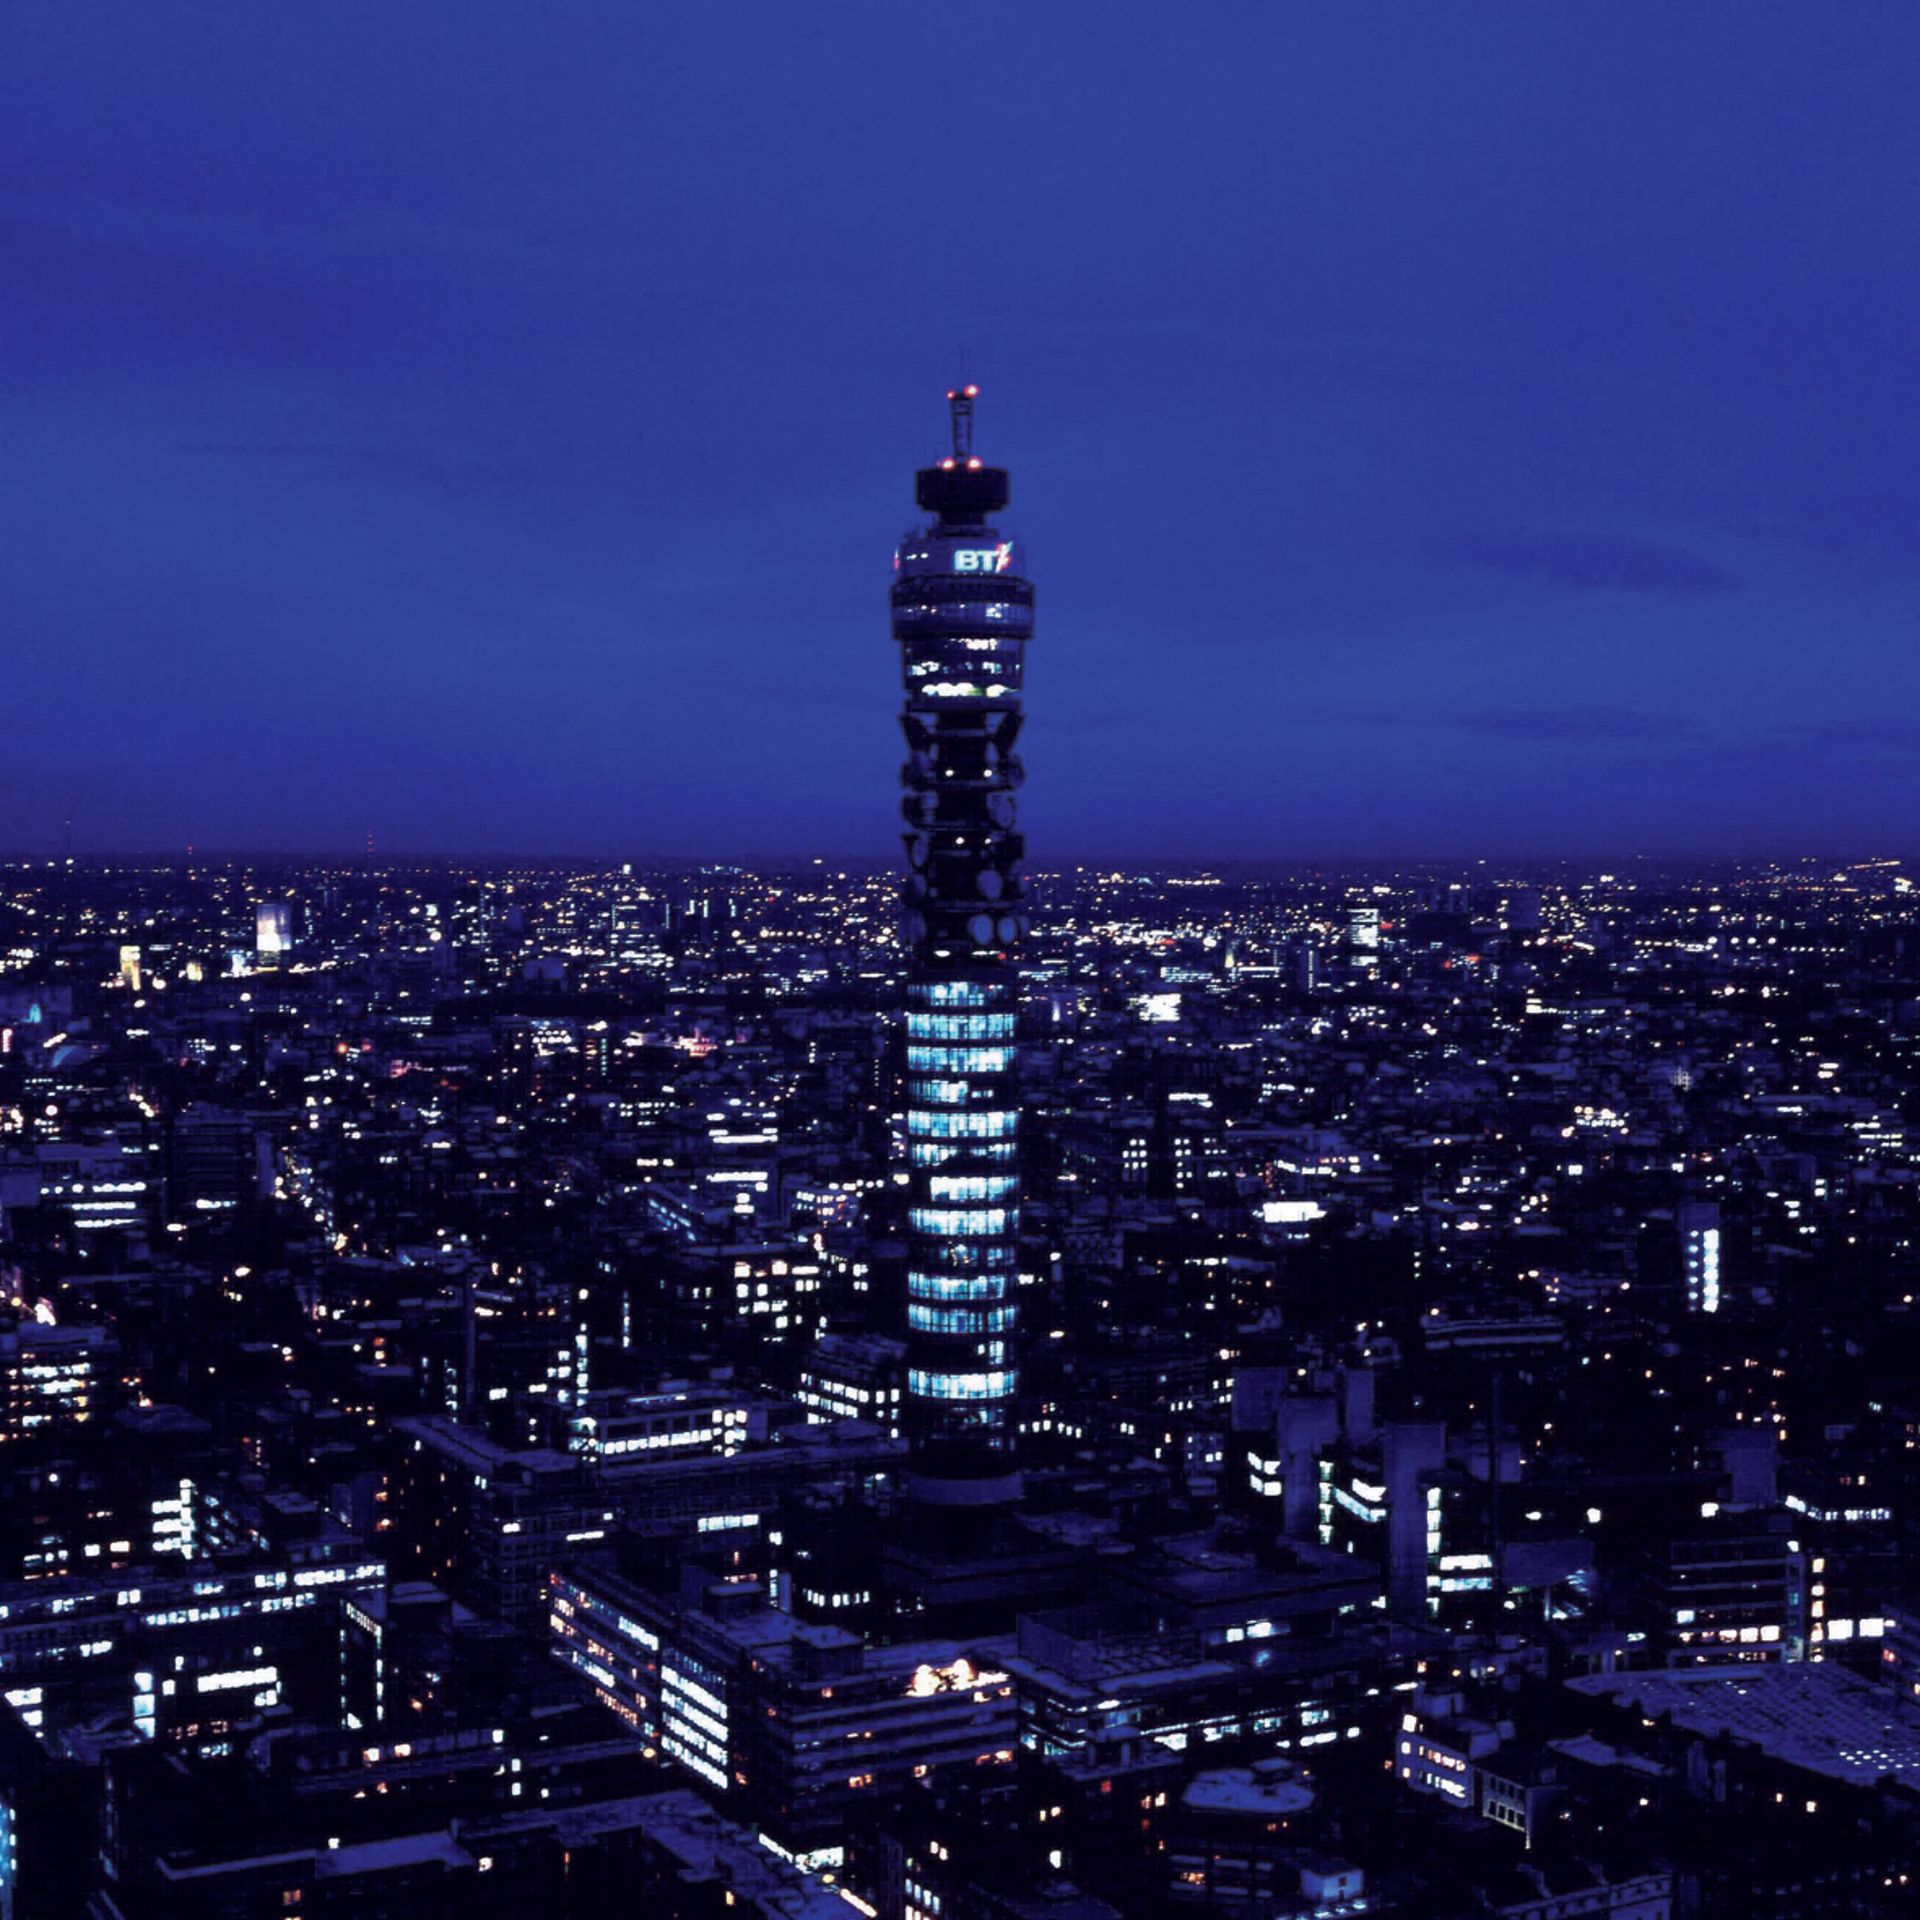 Guests of BT to enjoy a fabulous 'invitation only'  Dinner for 10 at the BT Tower, Dining Club